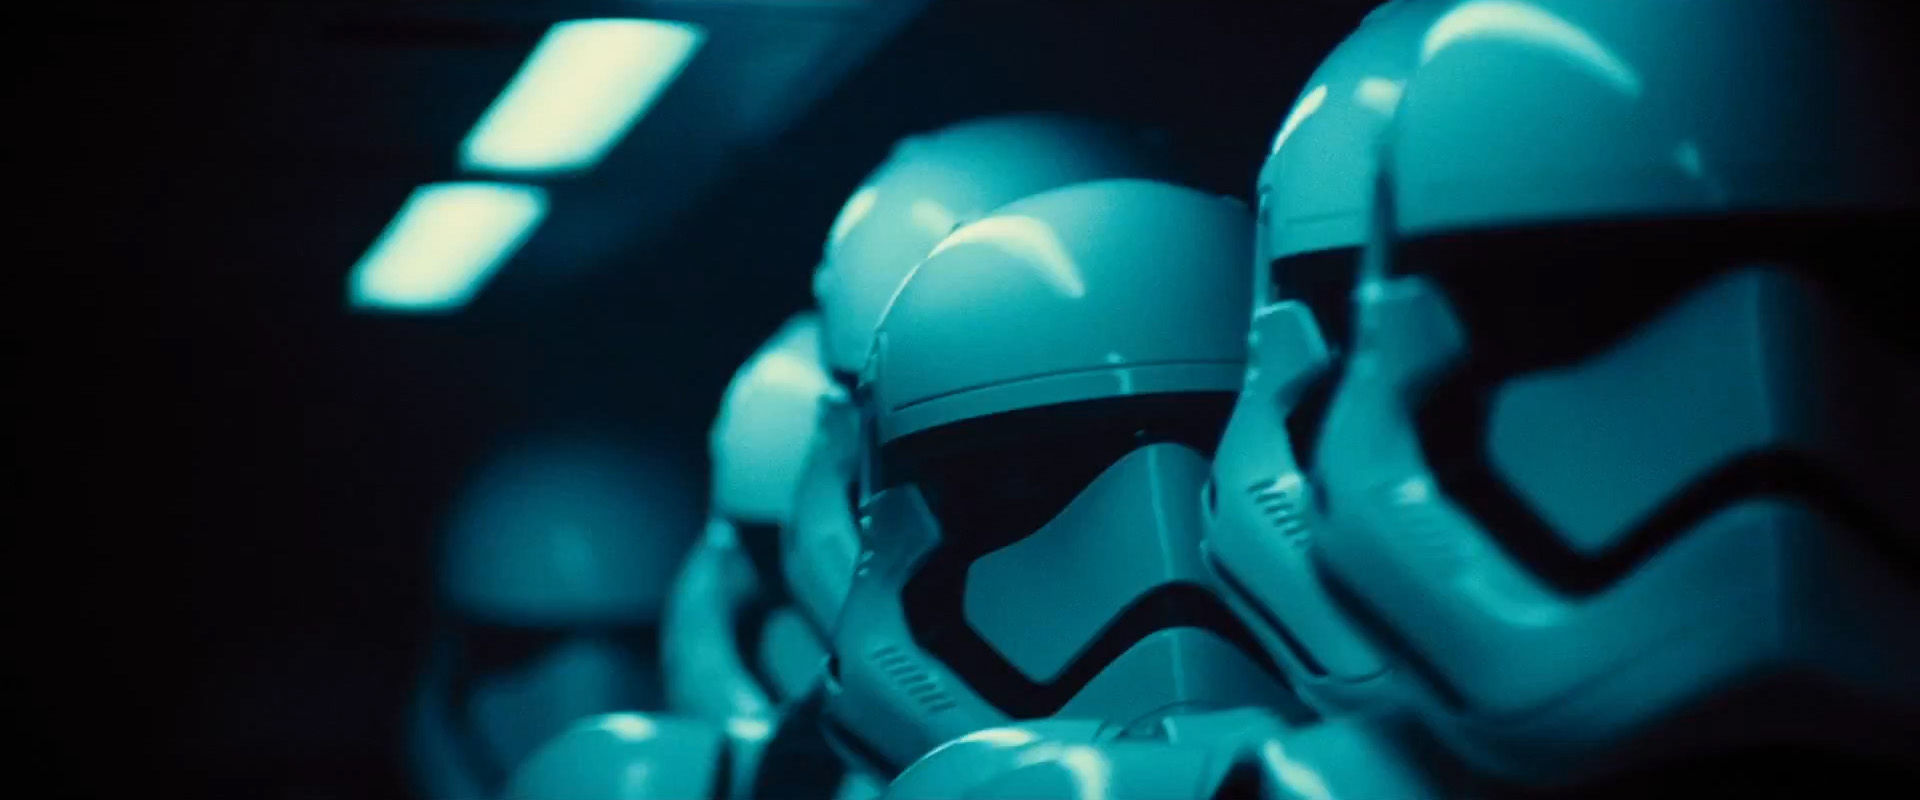 Star Wars 7 Trailer Analysis A Closer Look At The Visuals